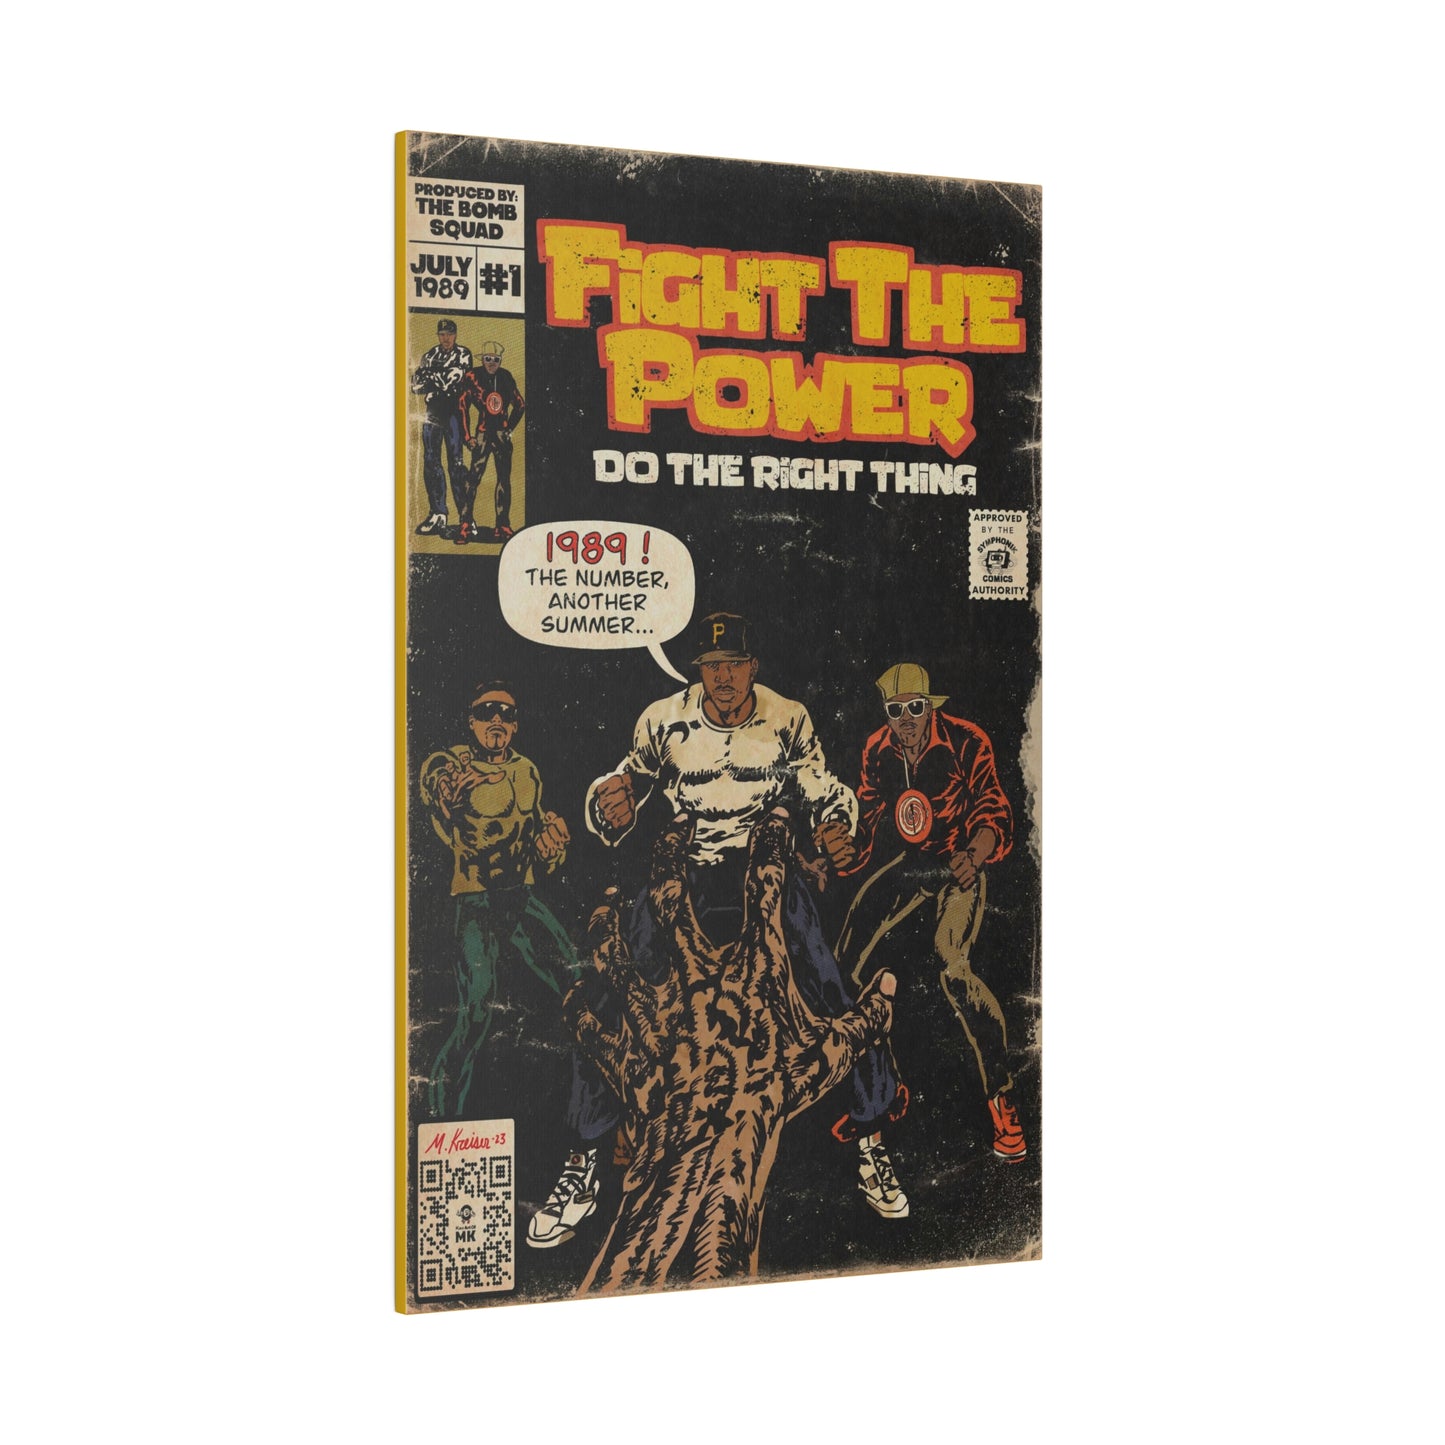 Public Enemy - Fight The Power -  Matte Canvas, Stretched, 0.75"